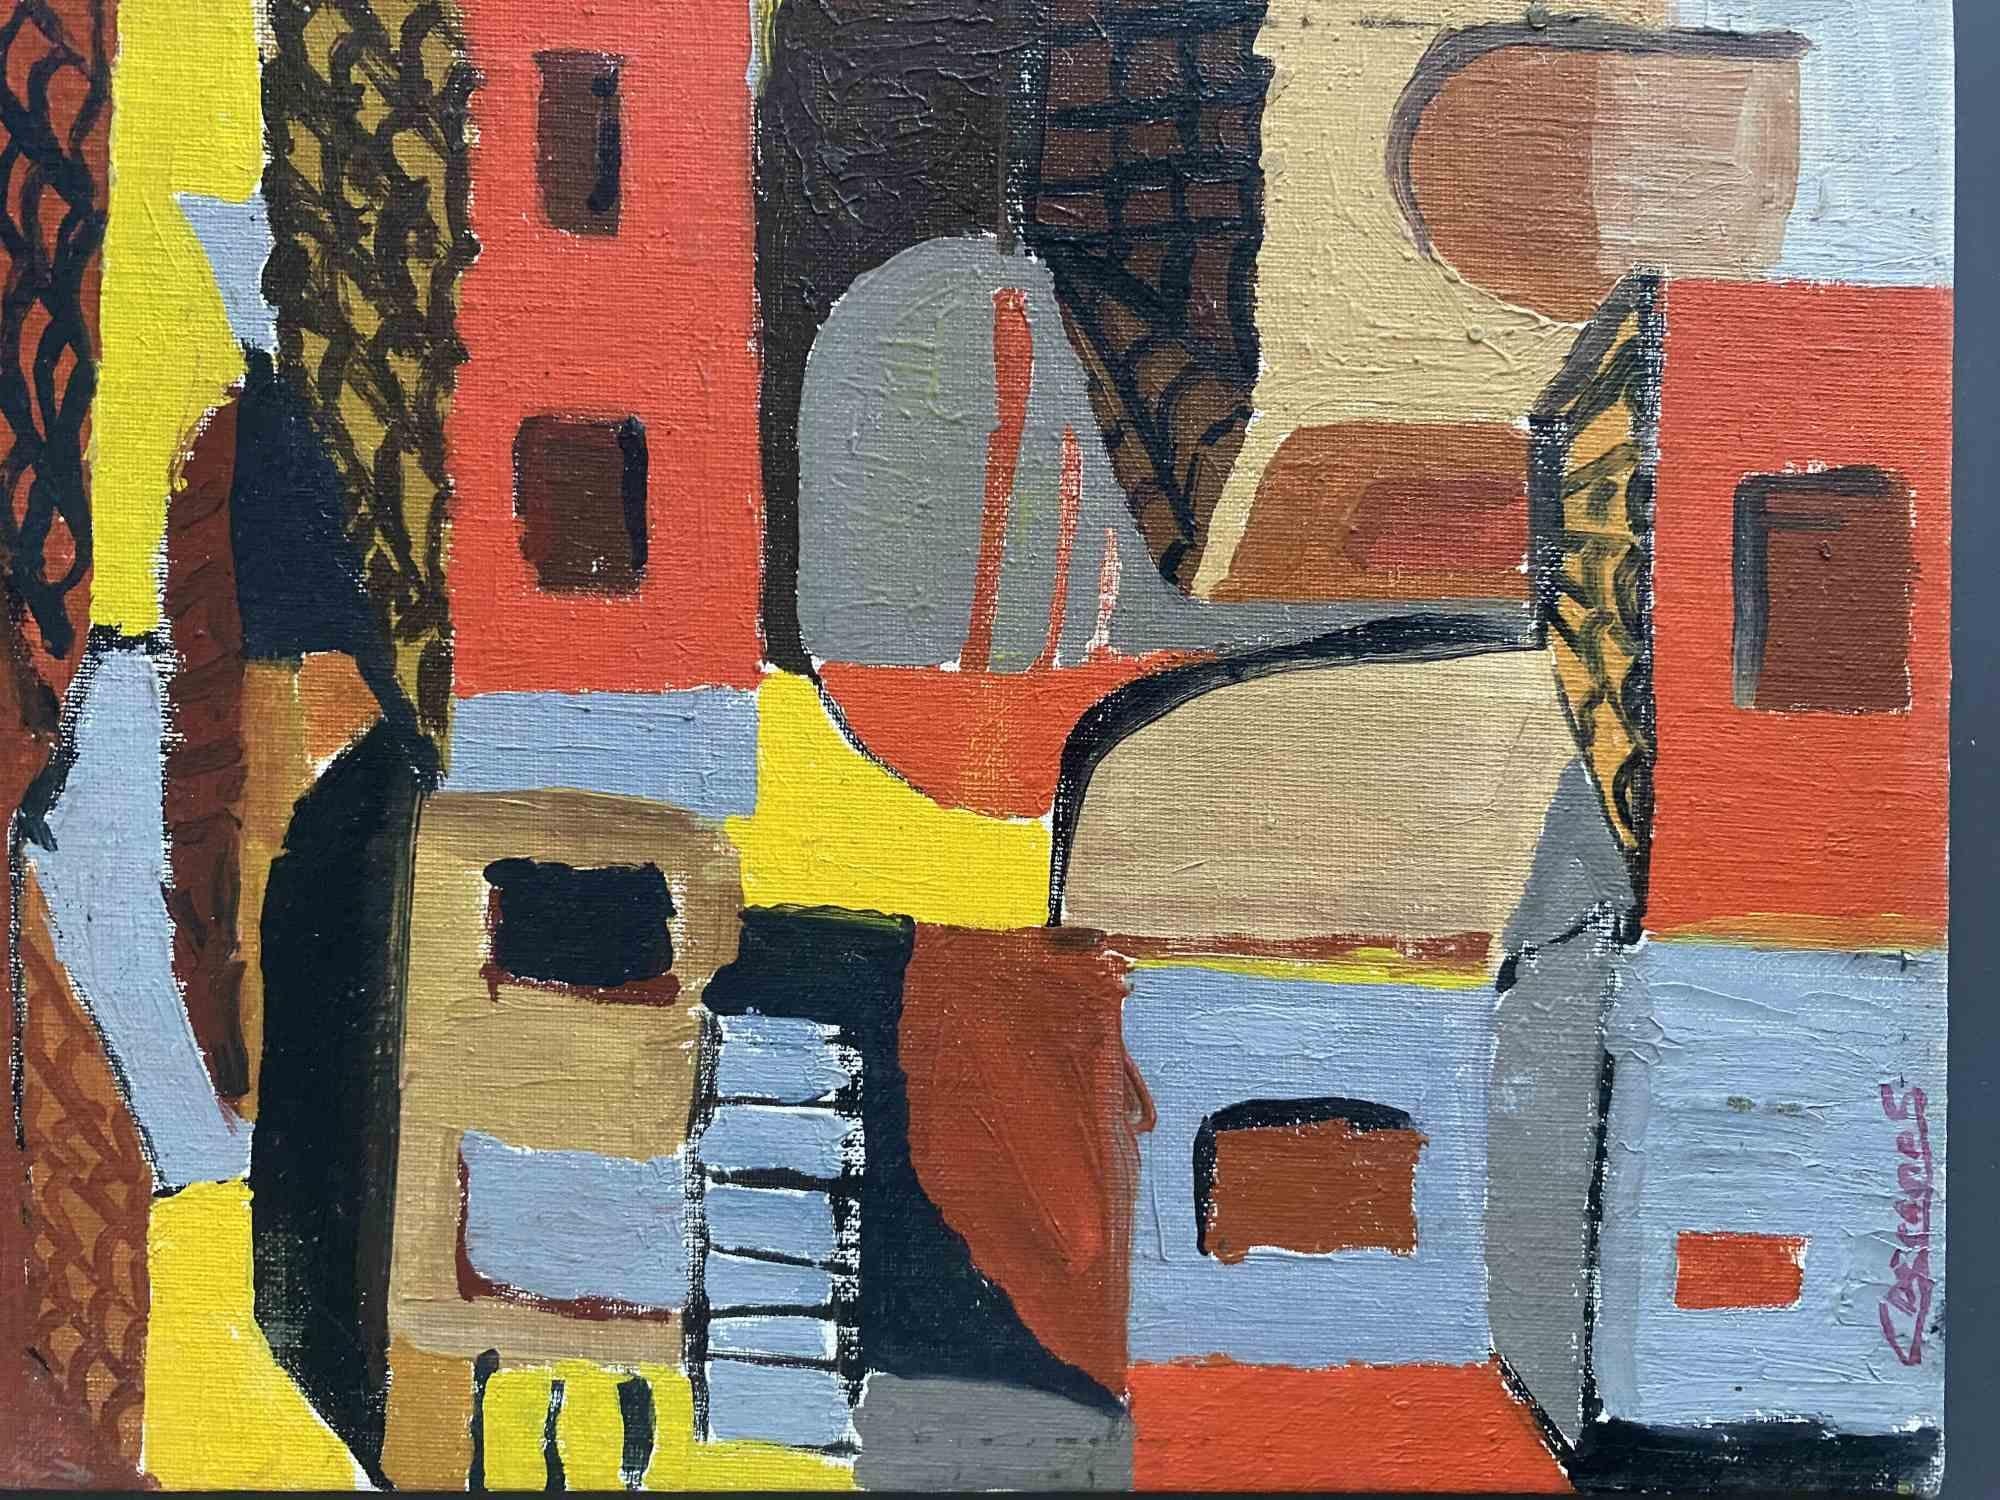 The Houses is a  painting realized by Claude Decamps in the 1970s

Oil painting on cardboard canvas.

Hand-signed on the lower.

Good conditions.

The artwork is represented through soft brushstrokes smoothly, with harmonious vivid, and bright